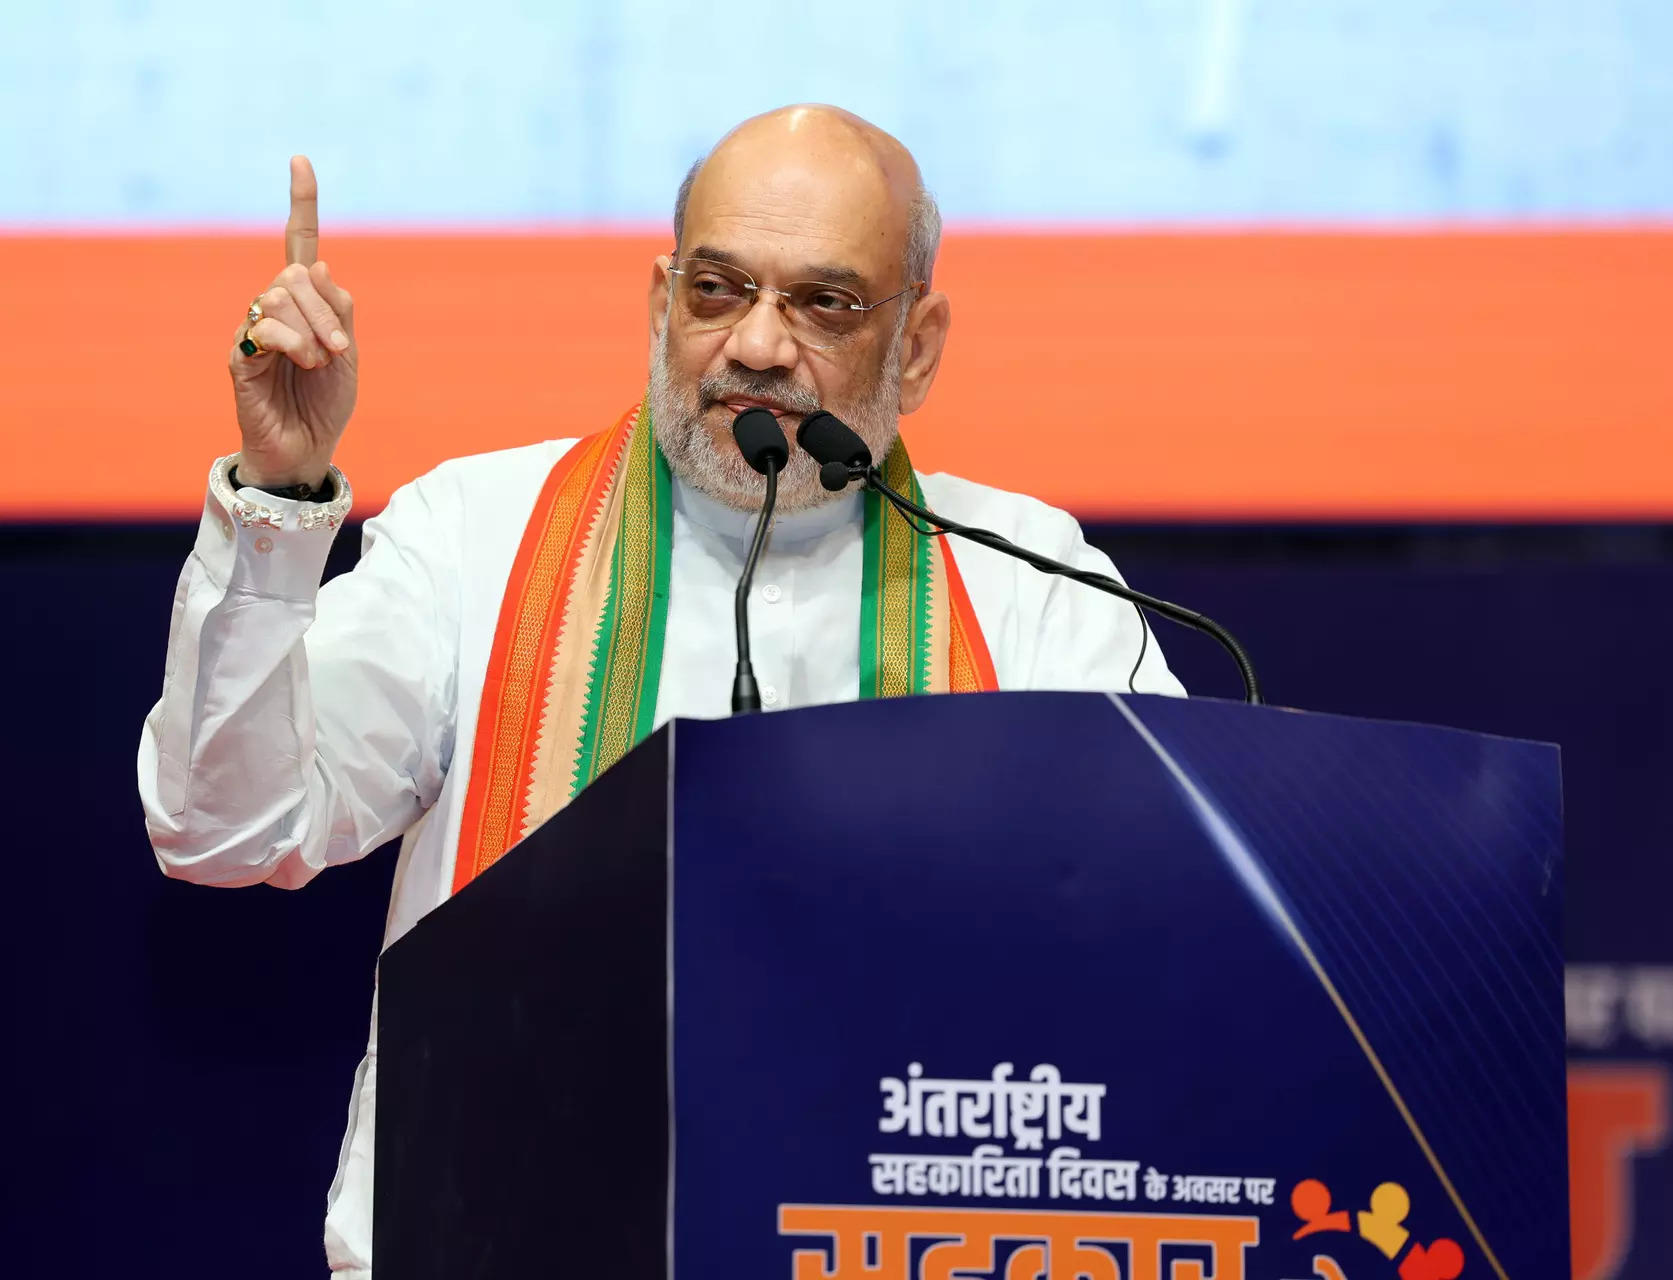 BJP will bring out 'White Paper' on demography in Jharkhand to protect tribal lands, rights: Shah 